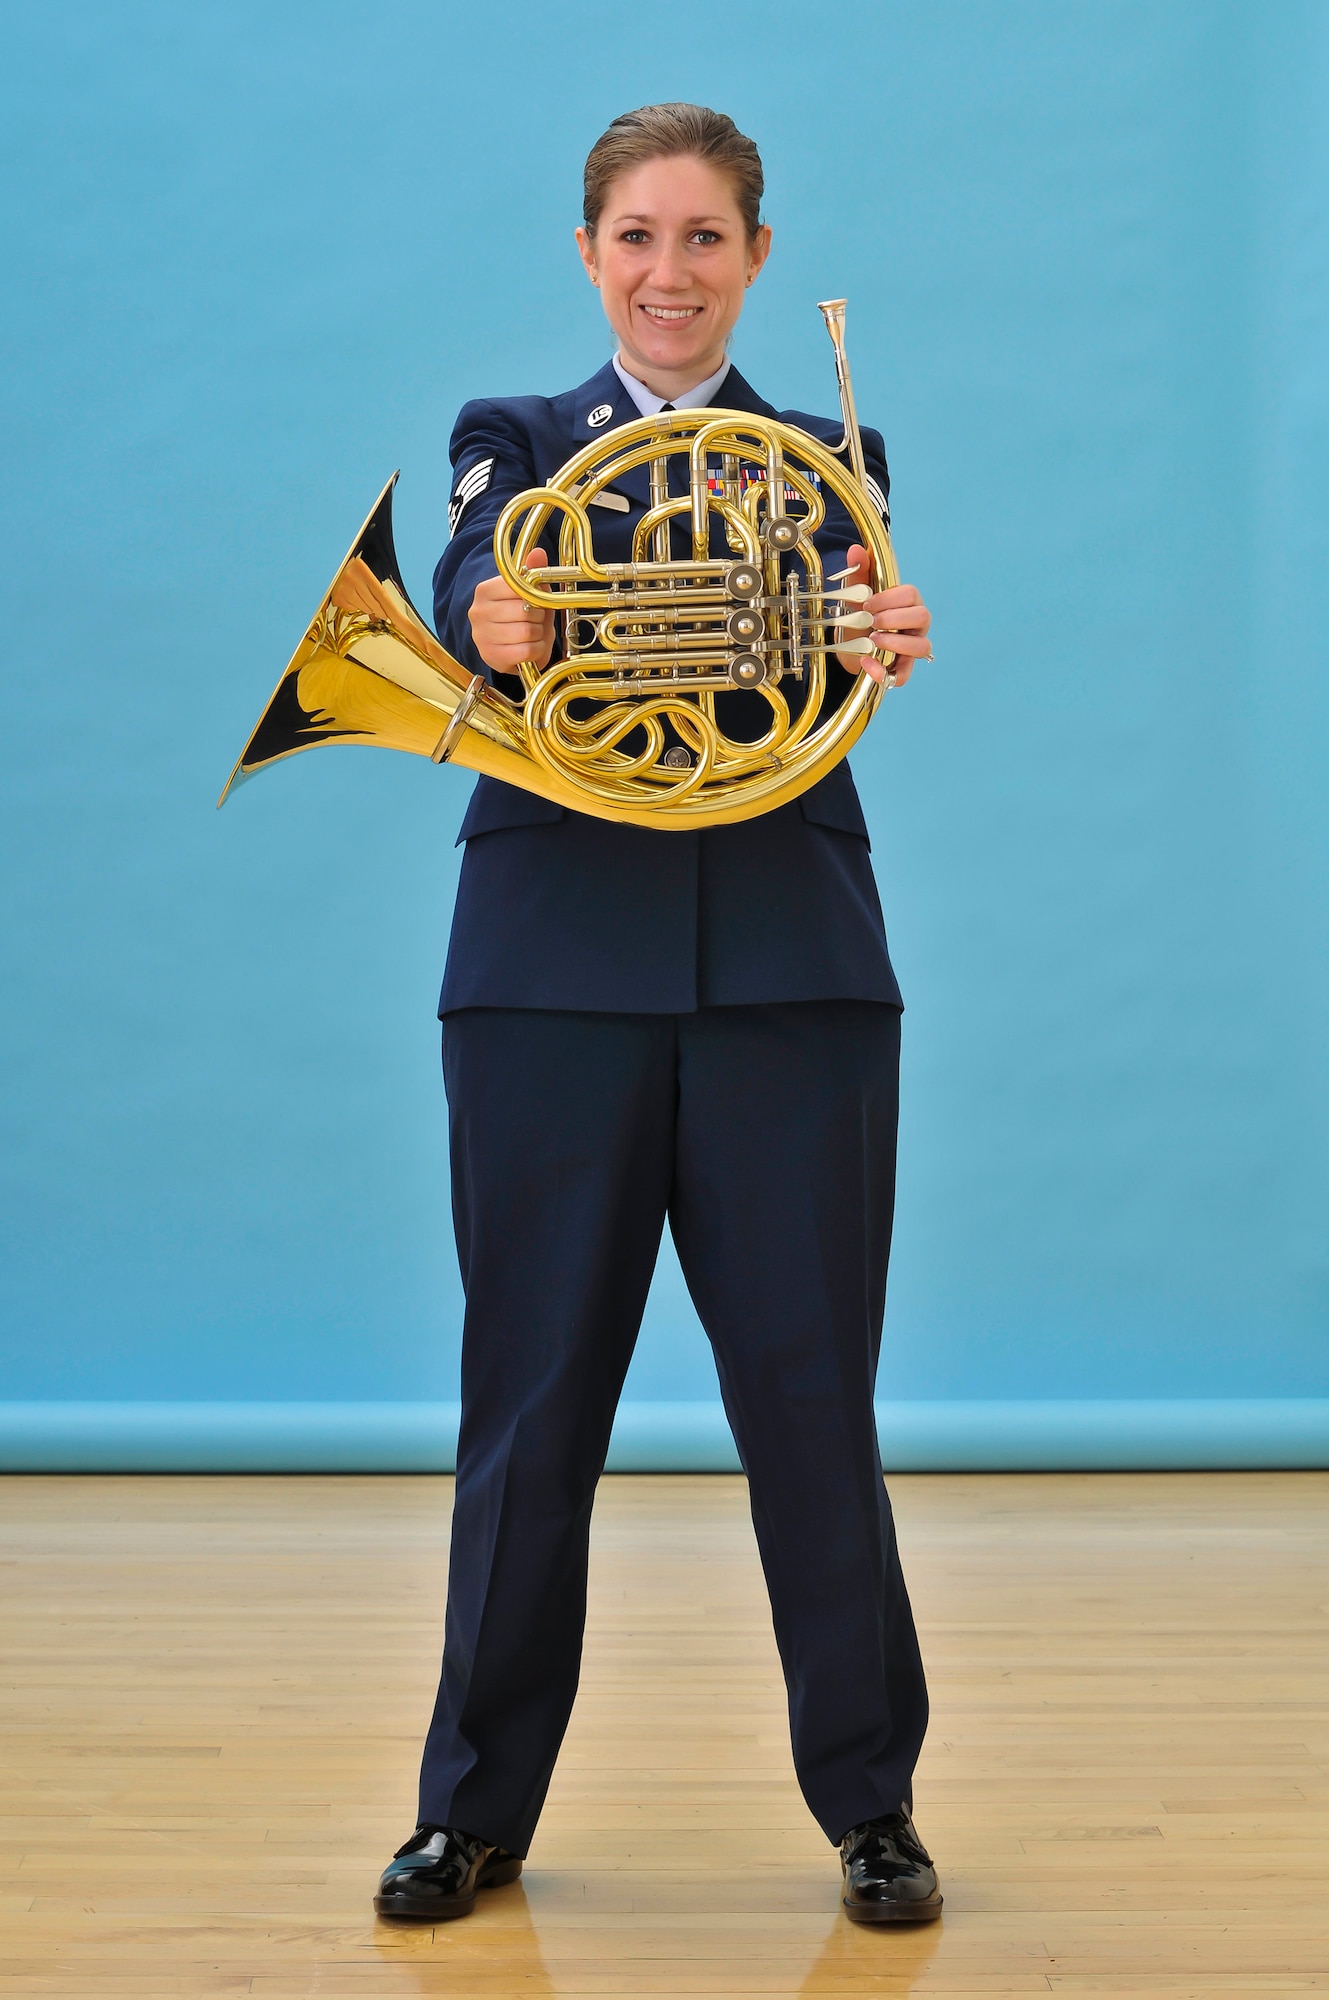 U.S. Air Force Staff Sgt. Carrie Gatz, an instrumentalist with the 566th Air Force Band, Illinois Air National Guard, poses with her French horn at the 182nd Airlift Wing in Peoria, Ill., Feb. 5, 2012. Gatz has served with the unit since 2004. (U.S. Air National Guard photo by Master Sgt. Scott Thompson)